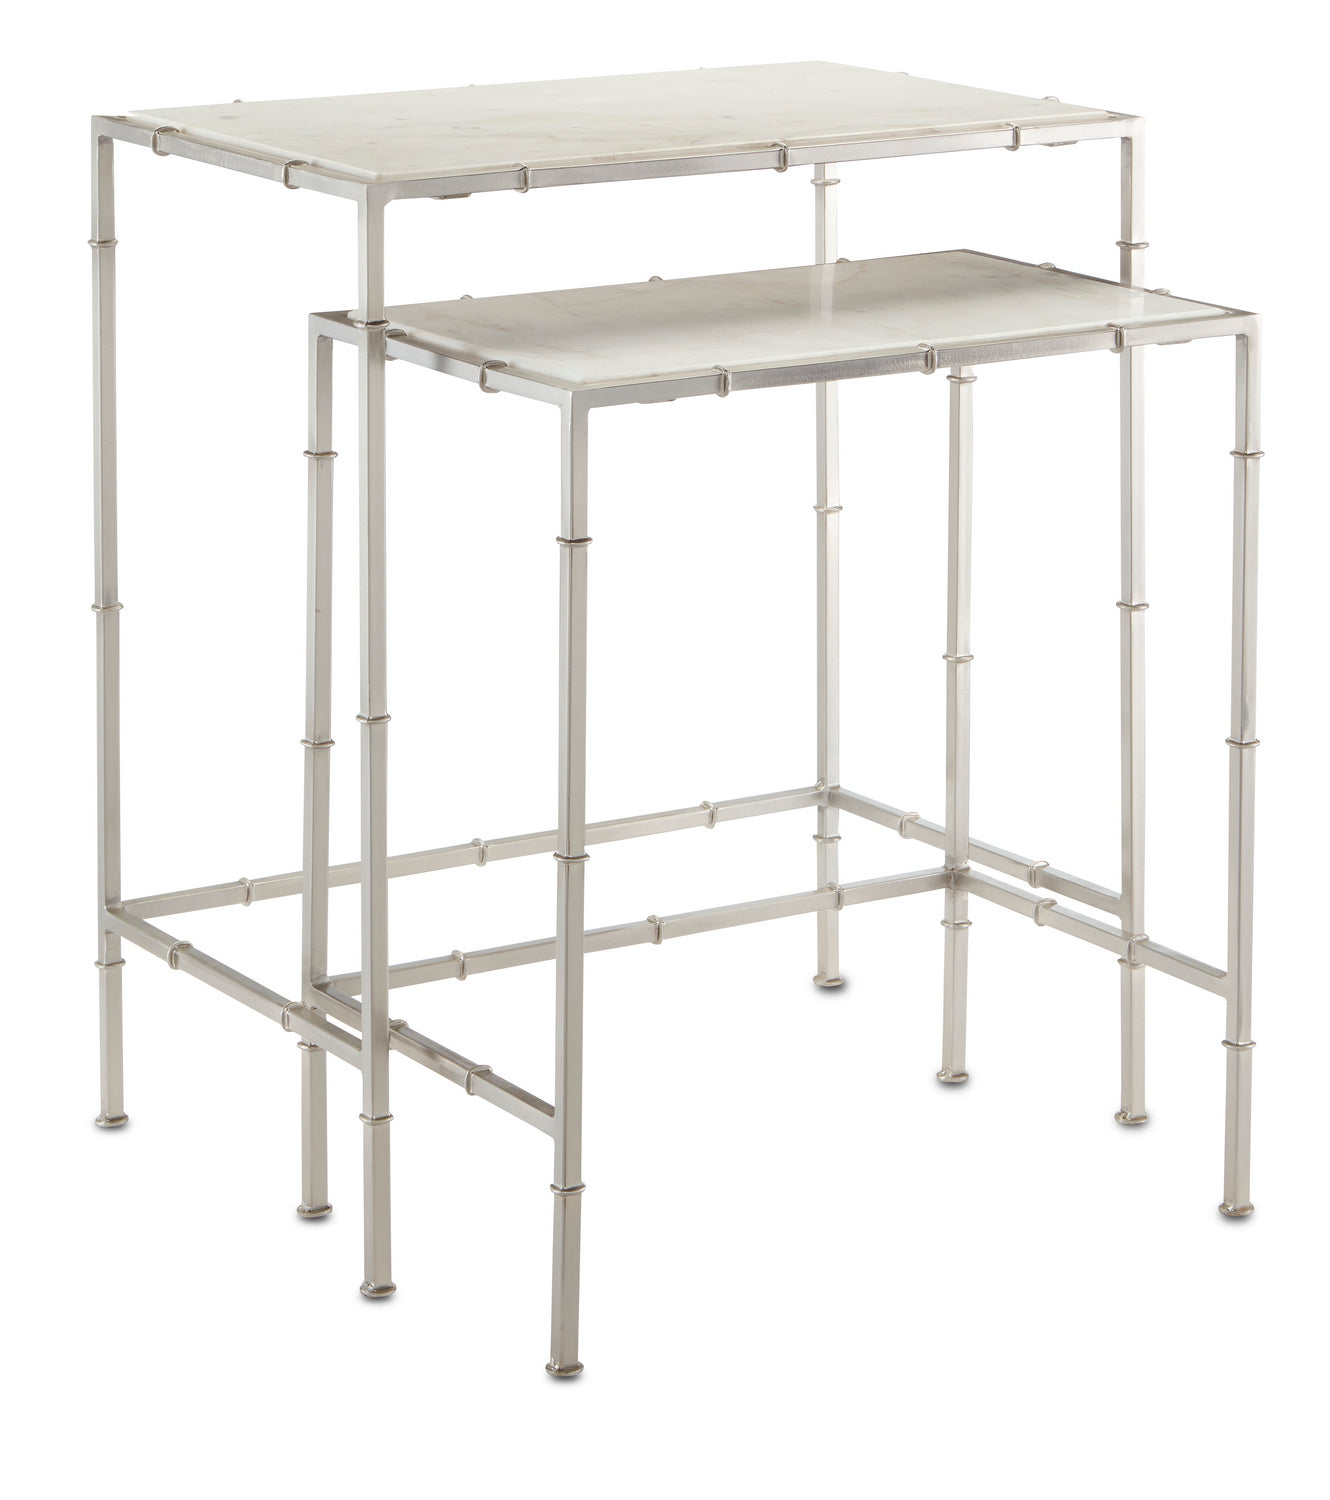 Nesting Table Set of 2 from the Harte collection in Nickel/White finish